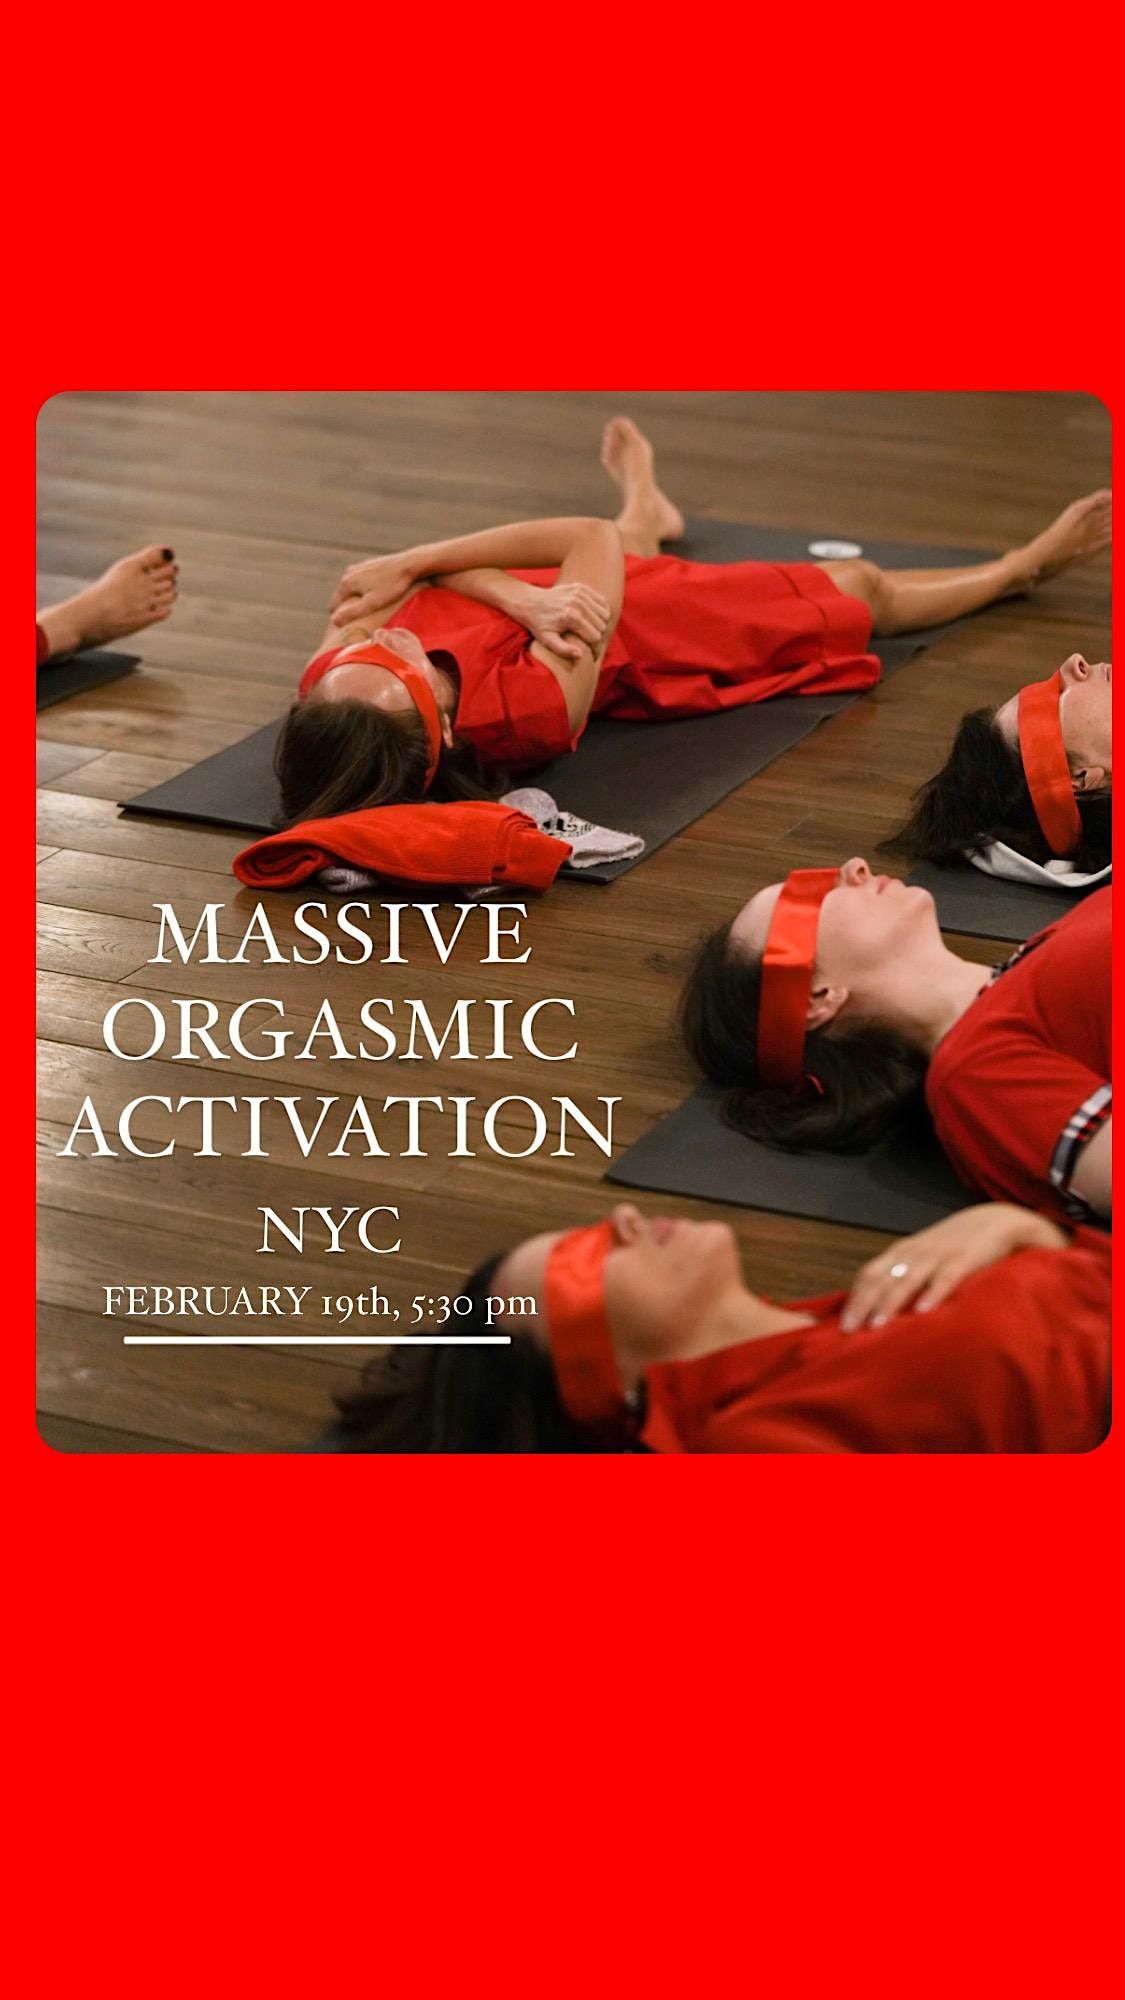 MASSIVE ORGASMIC ACTIVATION - LIVE in NY for WOMEN